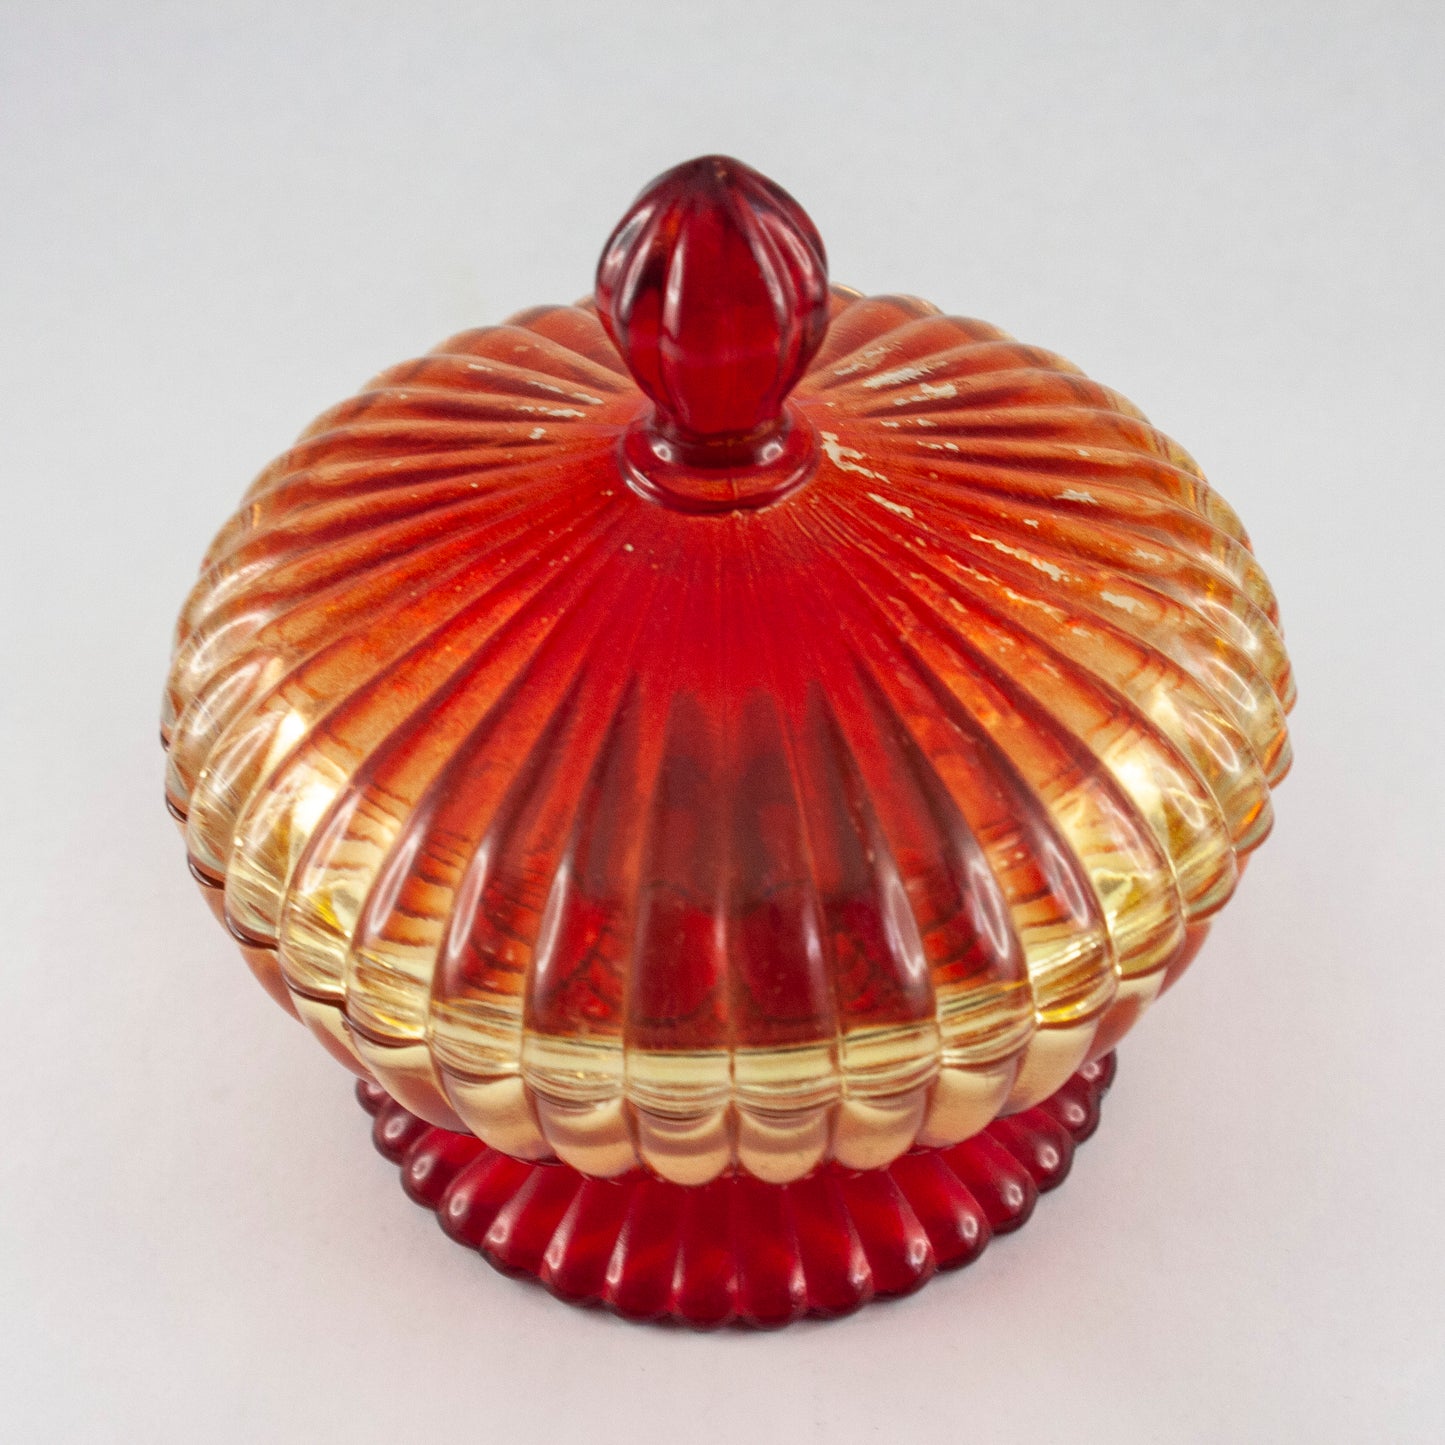 Orange Ombre Candy Dish